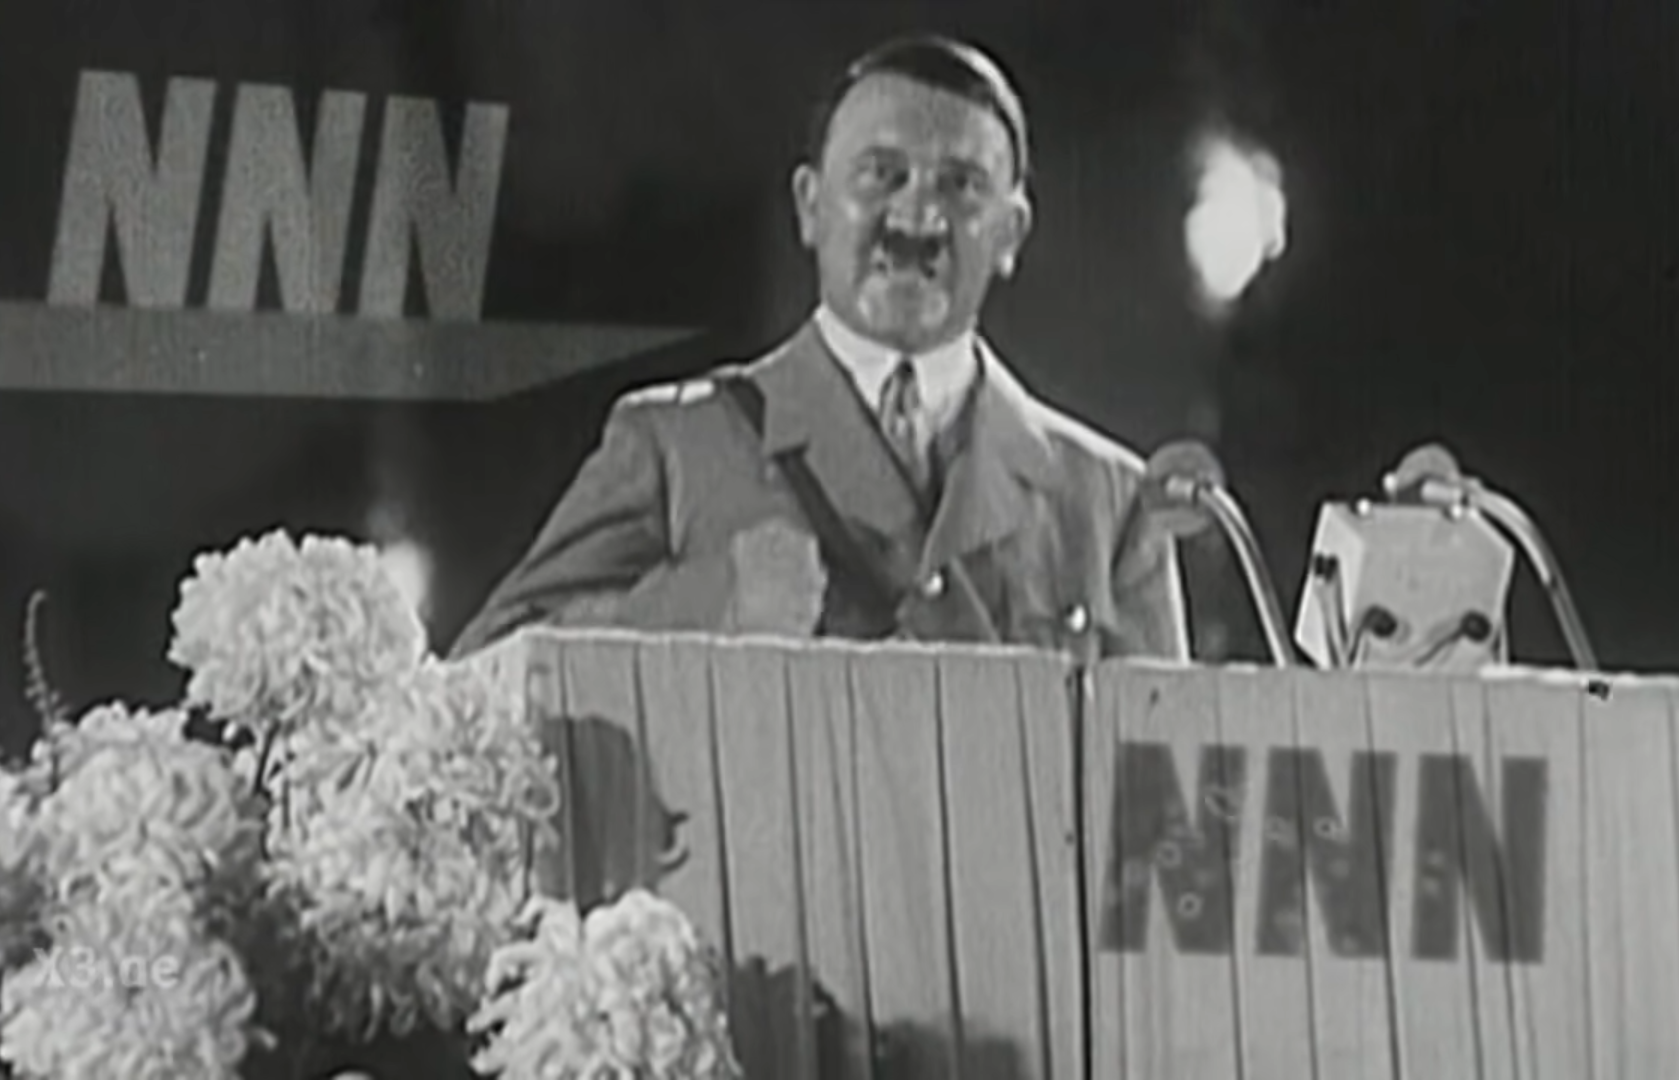 Hitler showing his support for No Nut November, 1933